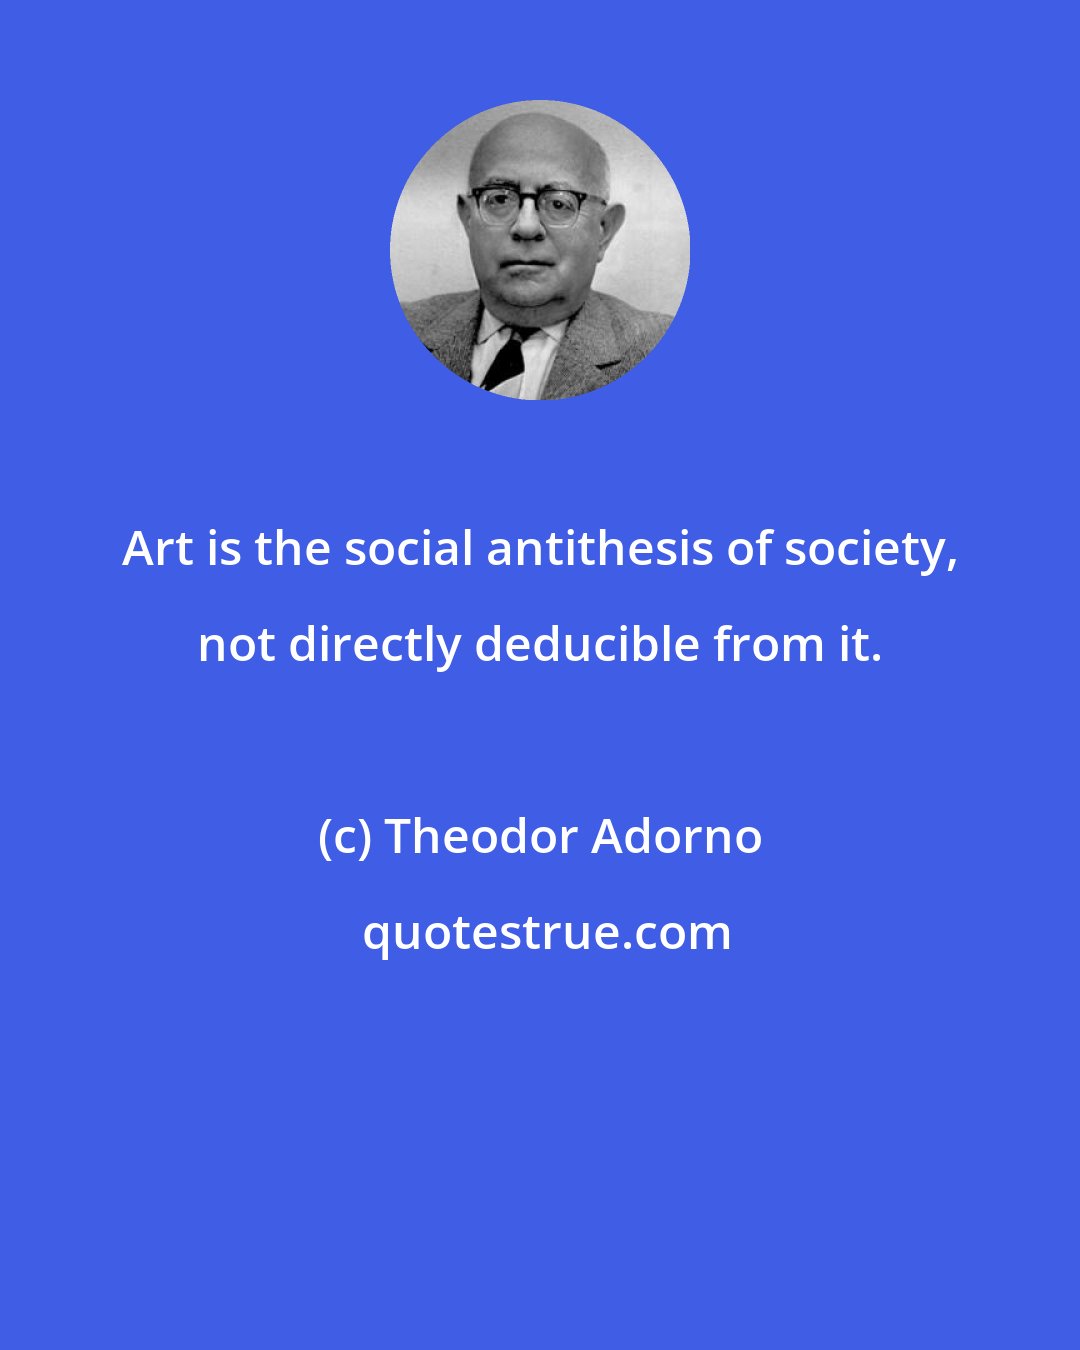 Theodor Adorno: Art is the social antithesis of society, not directly deducible from it.